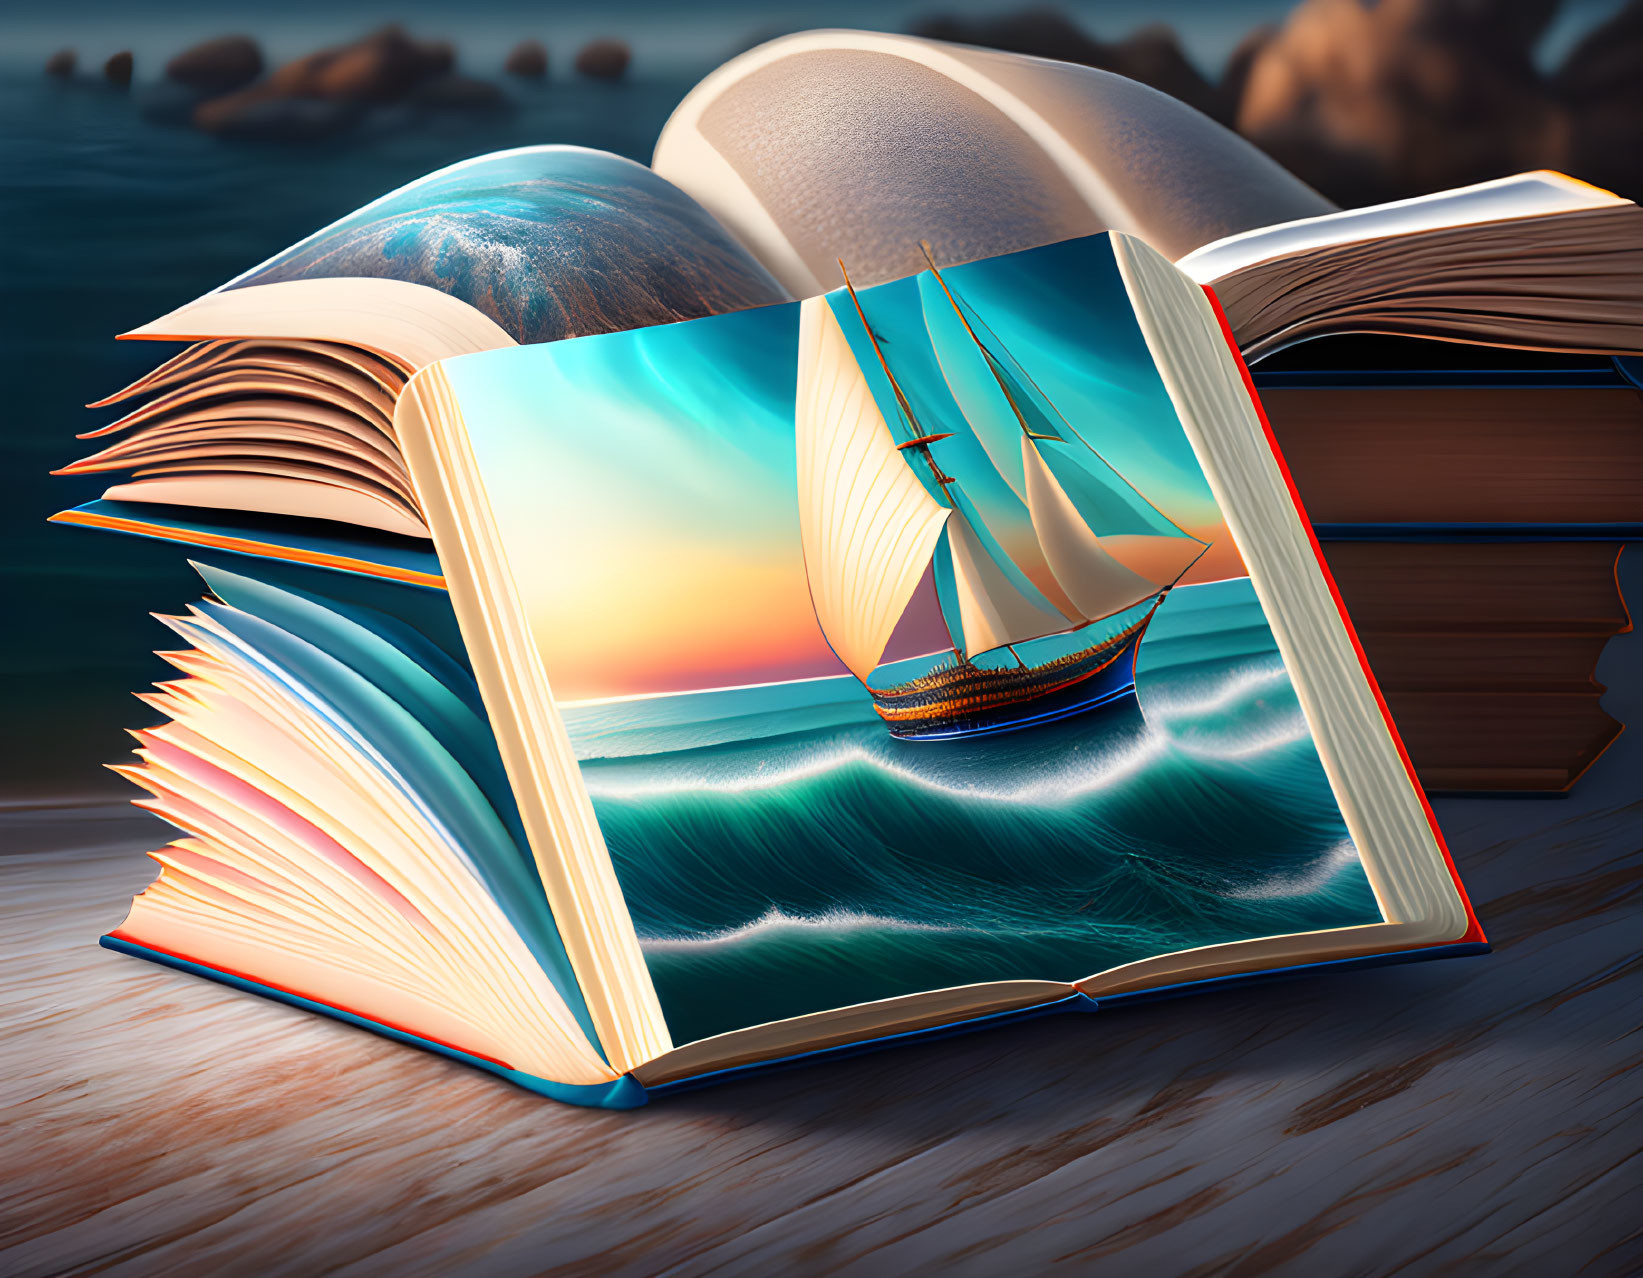 Boat at sea in the book